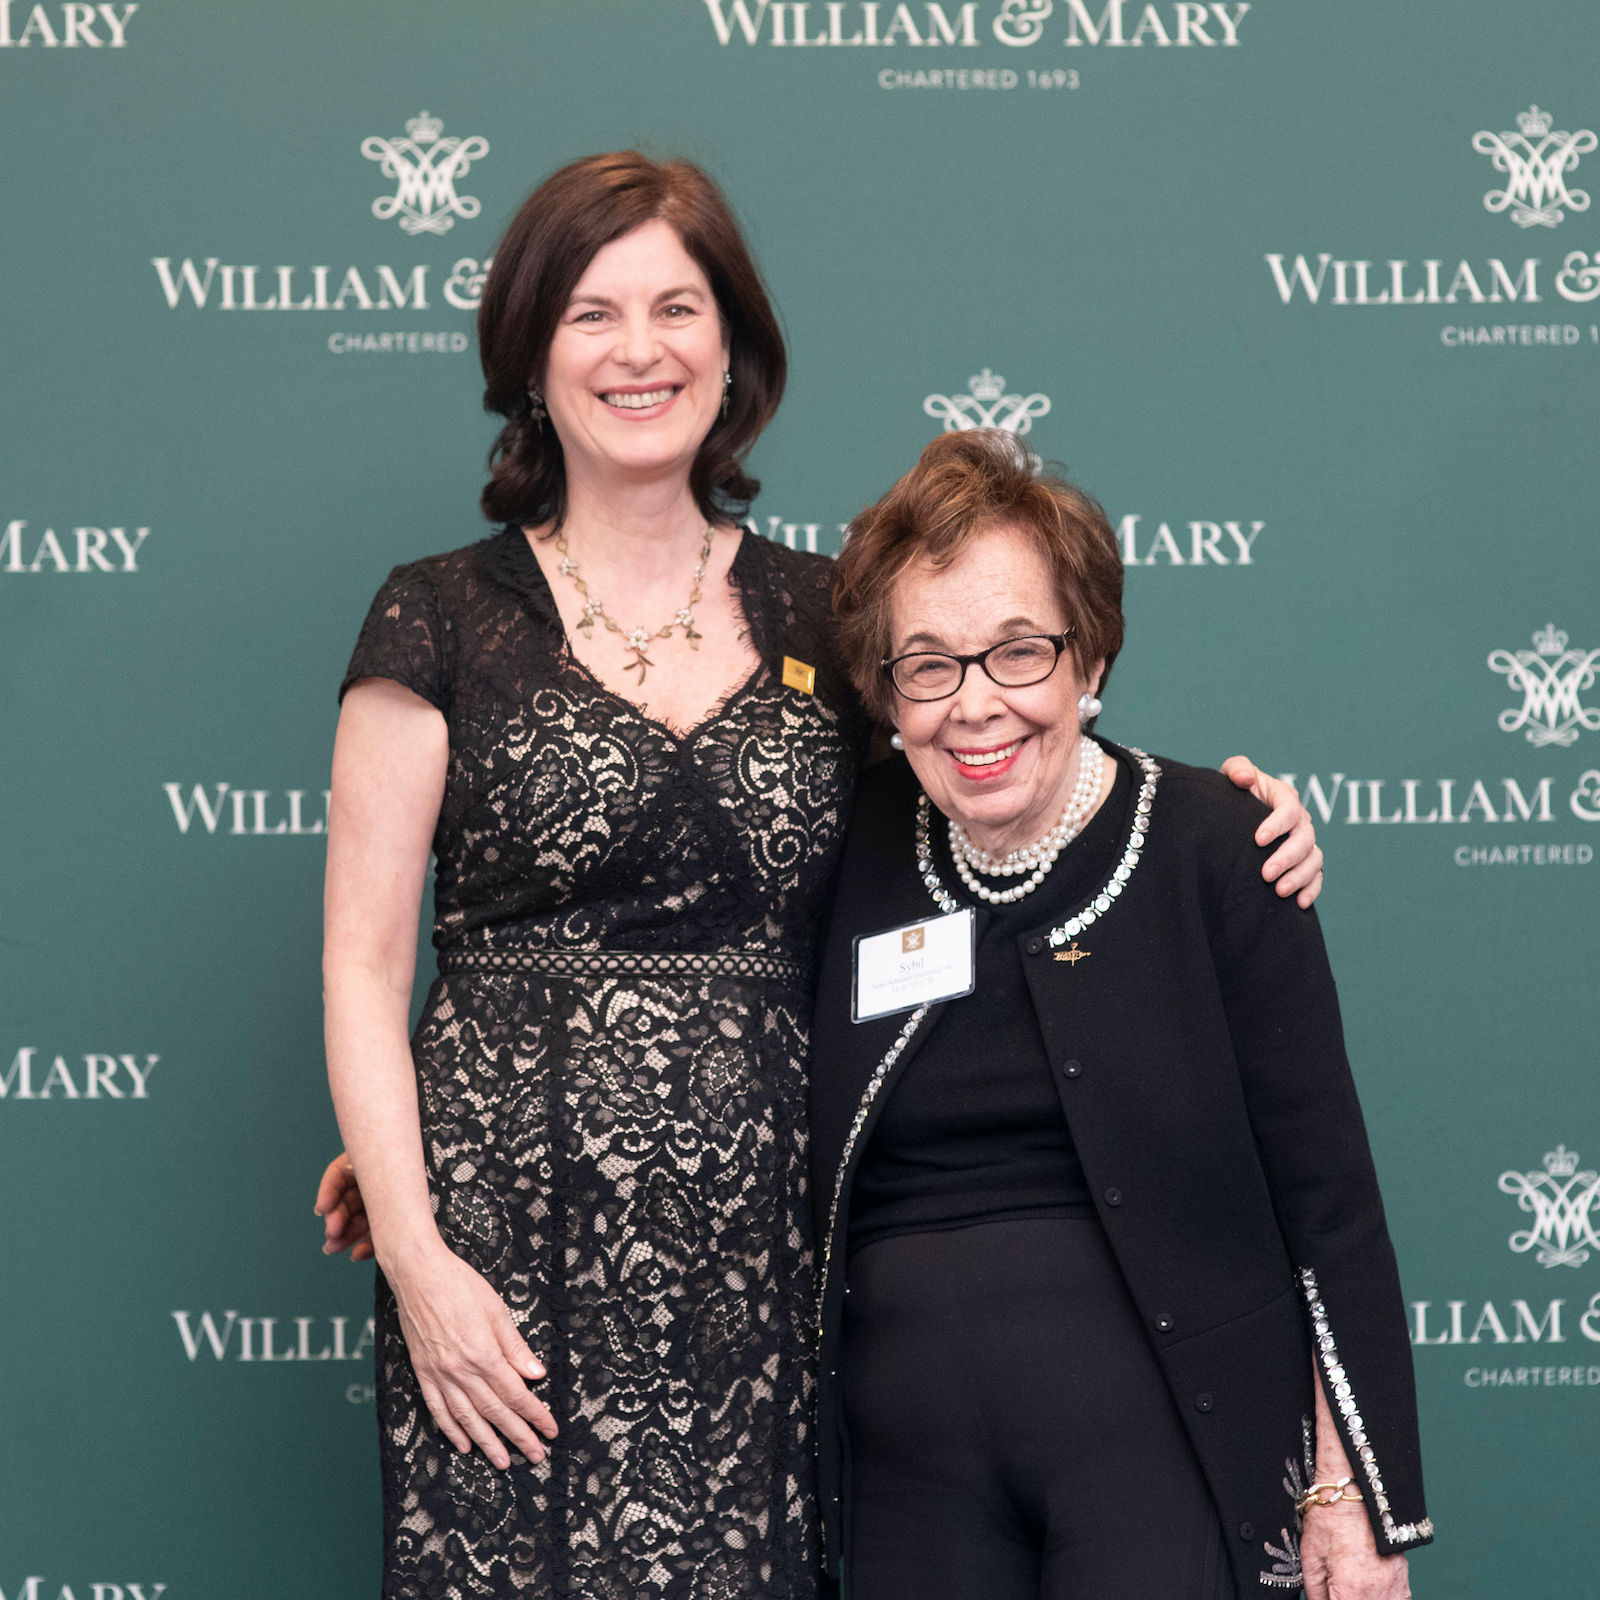 President Rowe and Sybil Shainwald, photo by Capture Photography